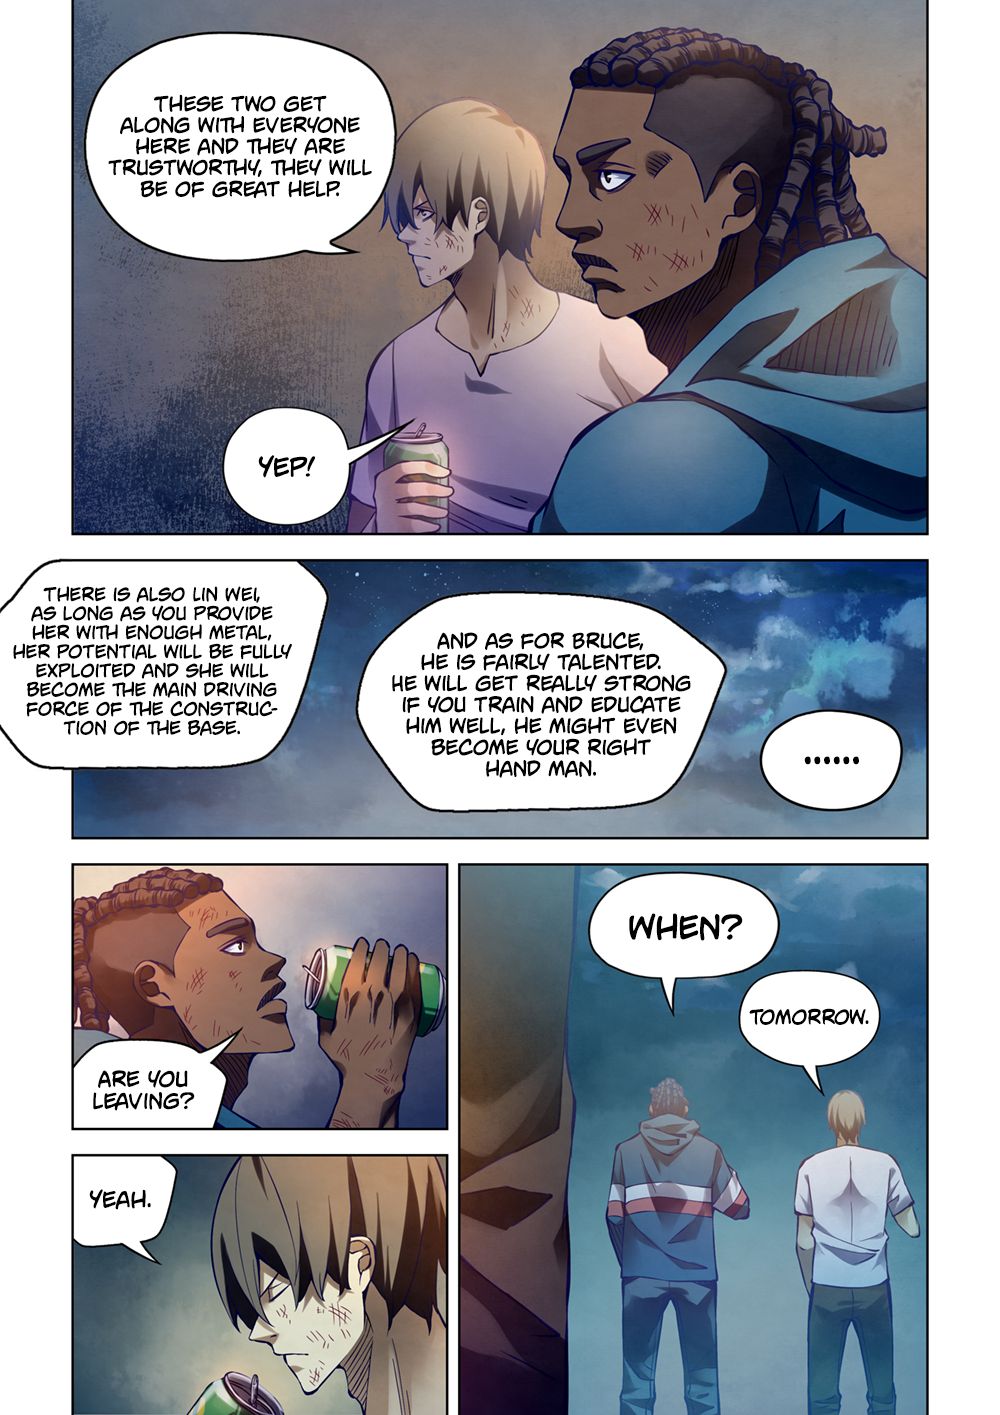 The Last Human Chapter 182 Page 5